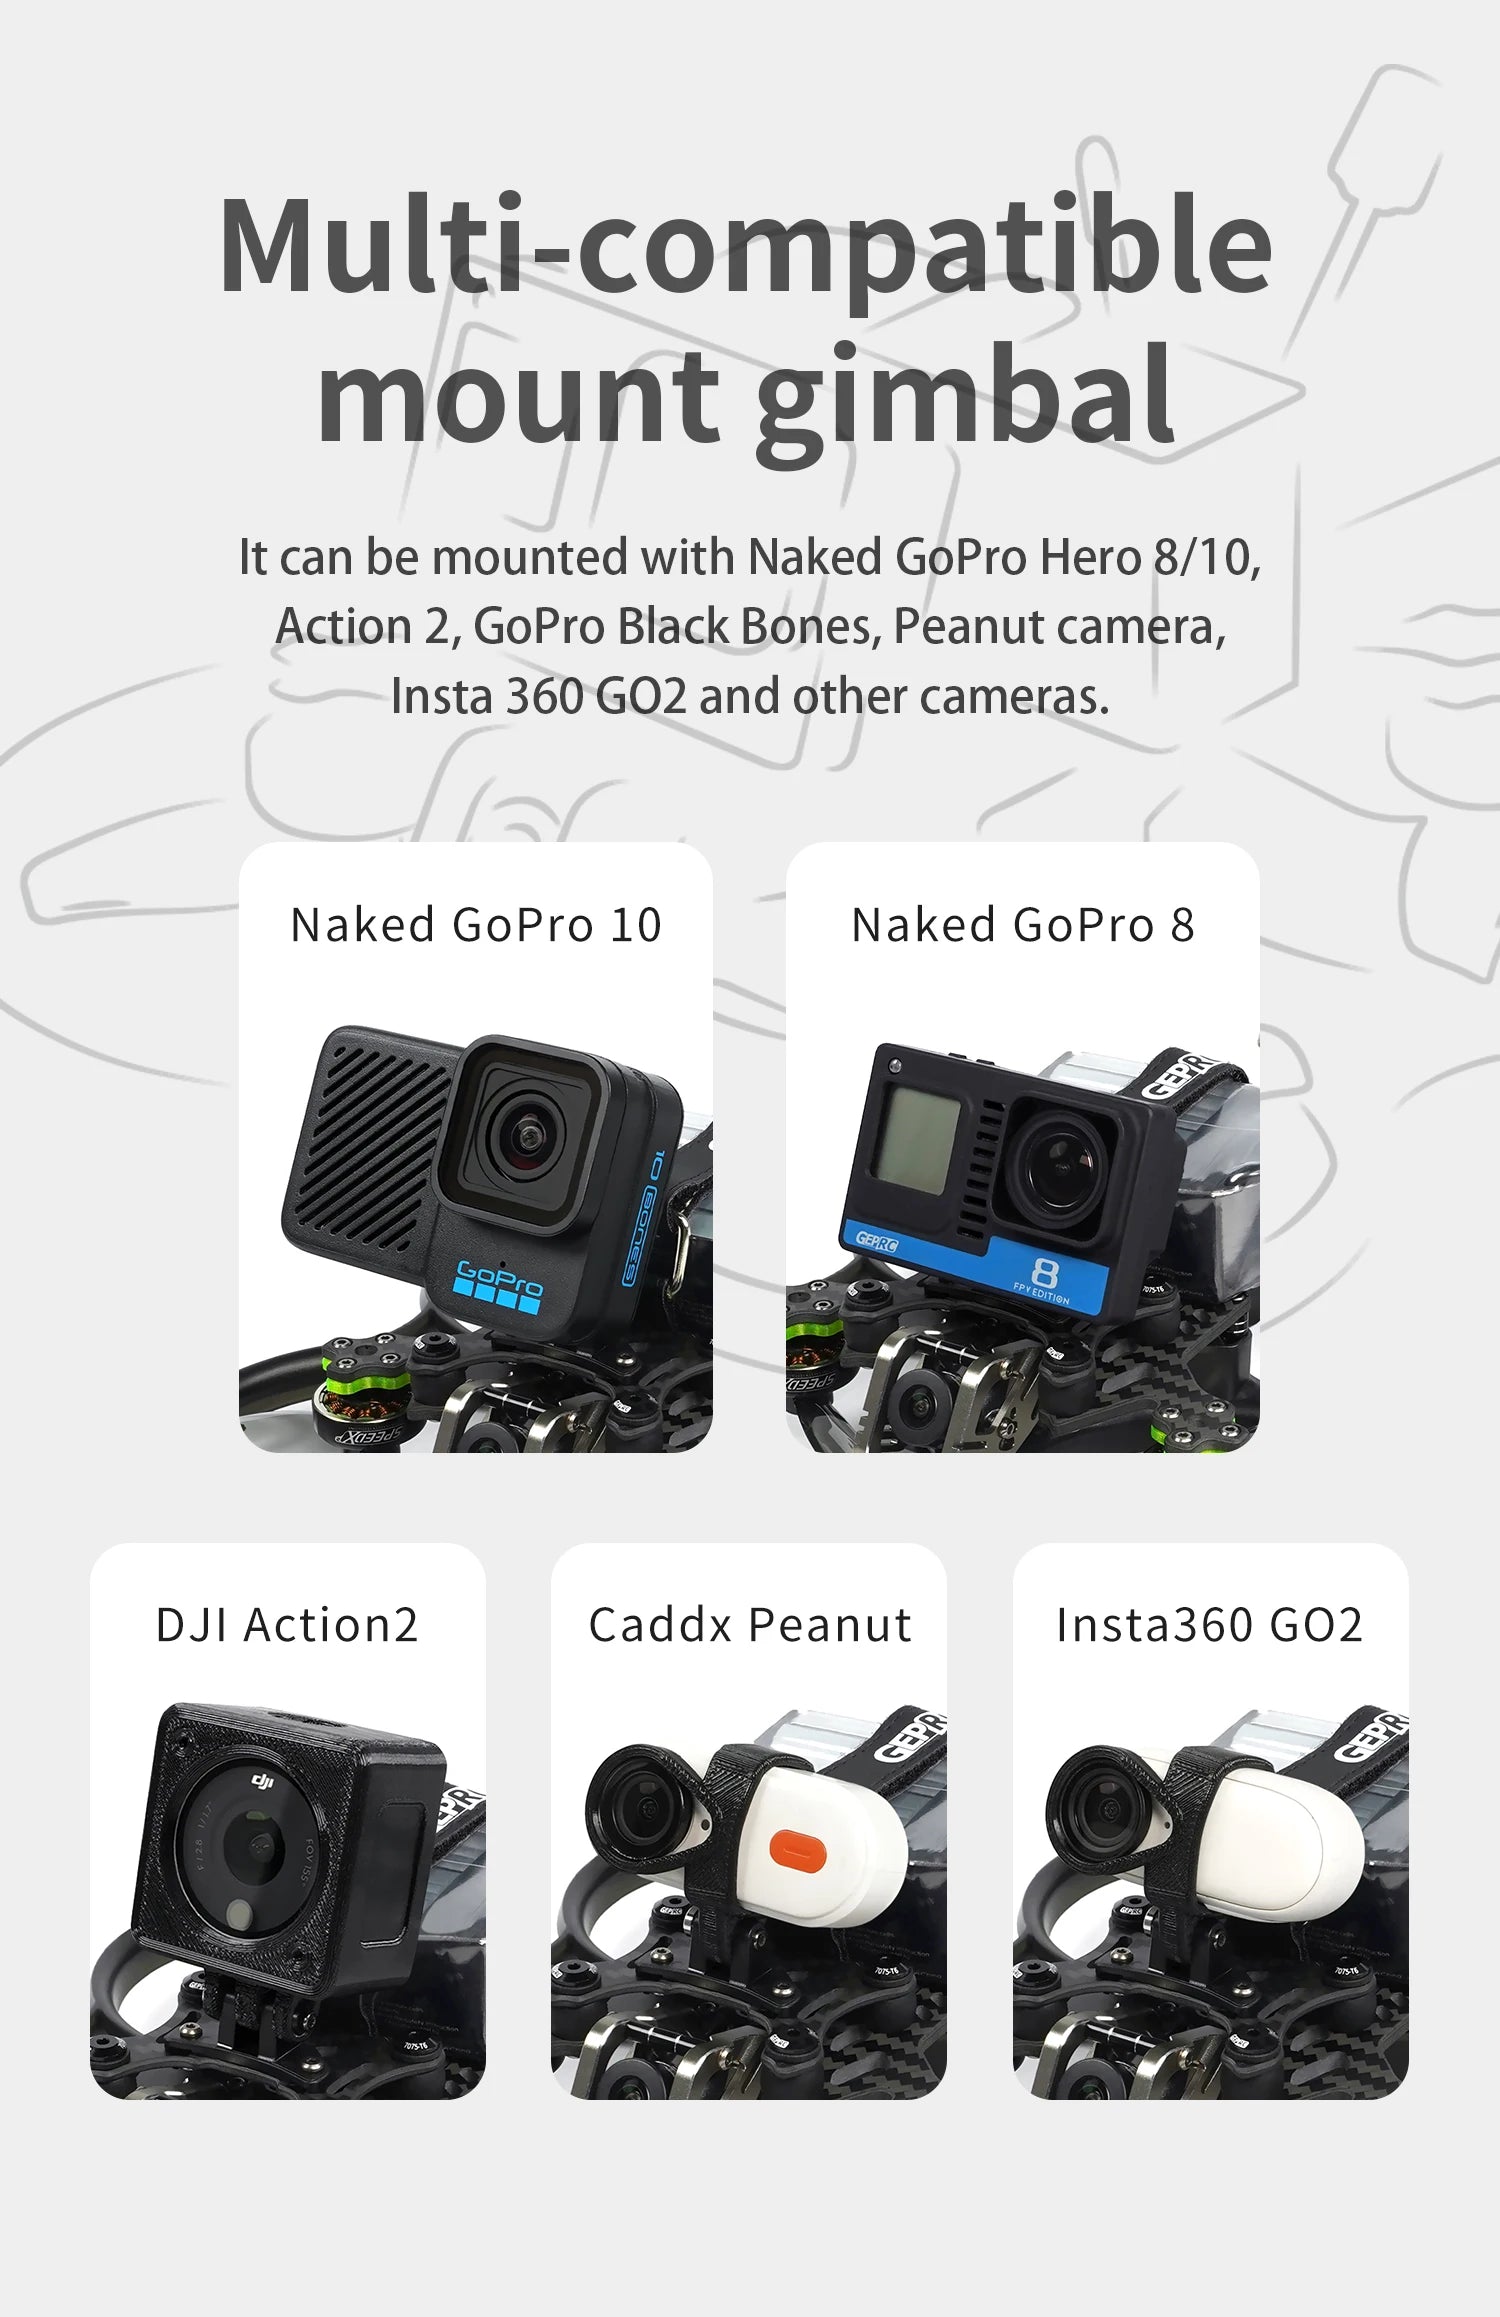 GEPRC Cinebot30 FPV Drone, gimbal can be mounted with Naked GoPro Hero 8/10, Action 2, Go